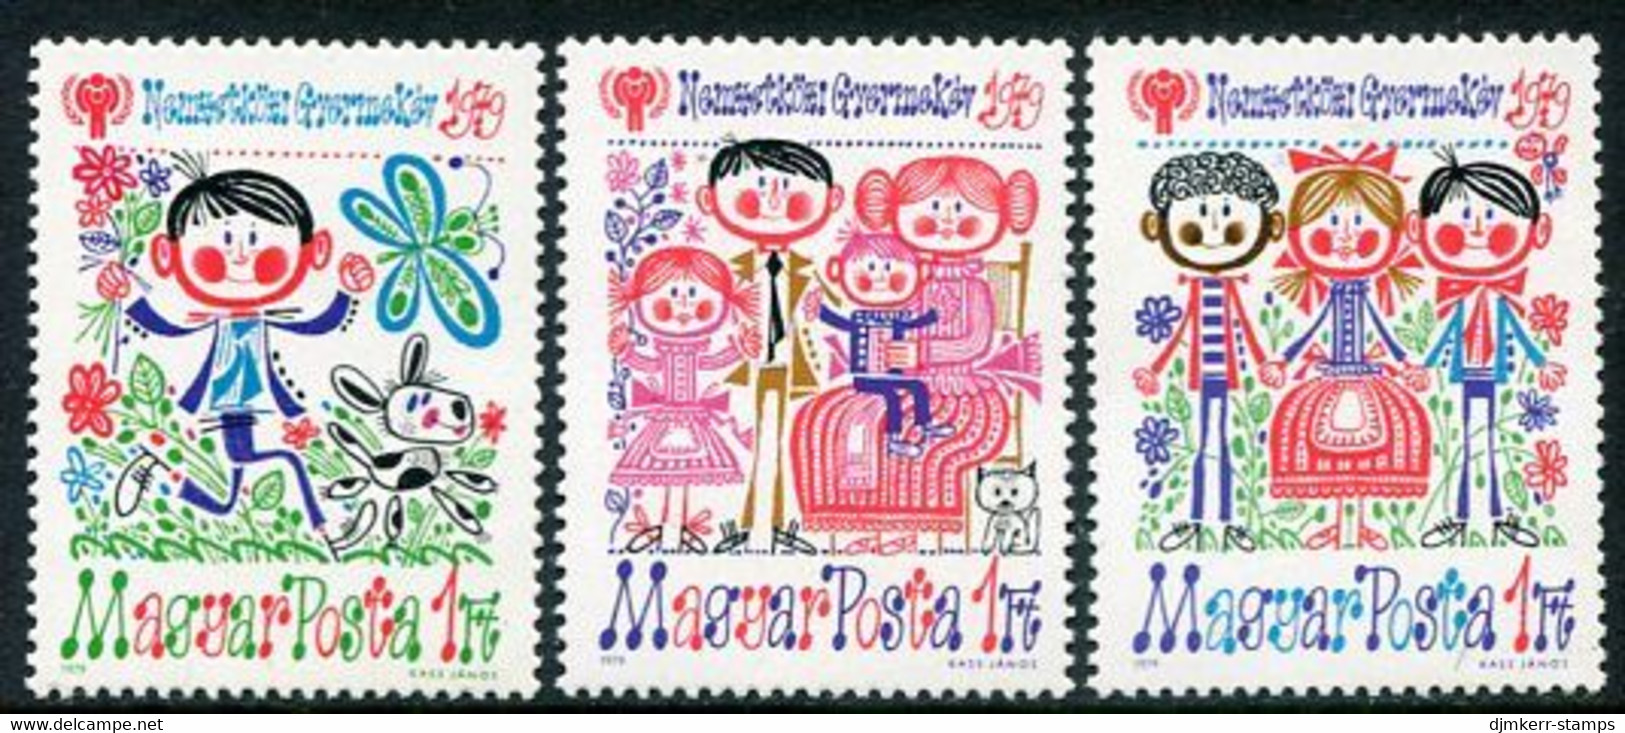 HUNGARY 1979 Year Of The Child MNH / **.  Michel 3335-37 - Unused Stamps